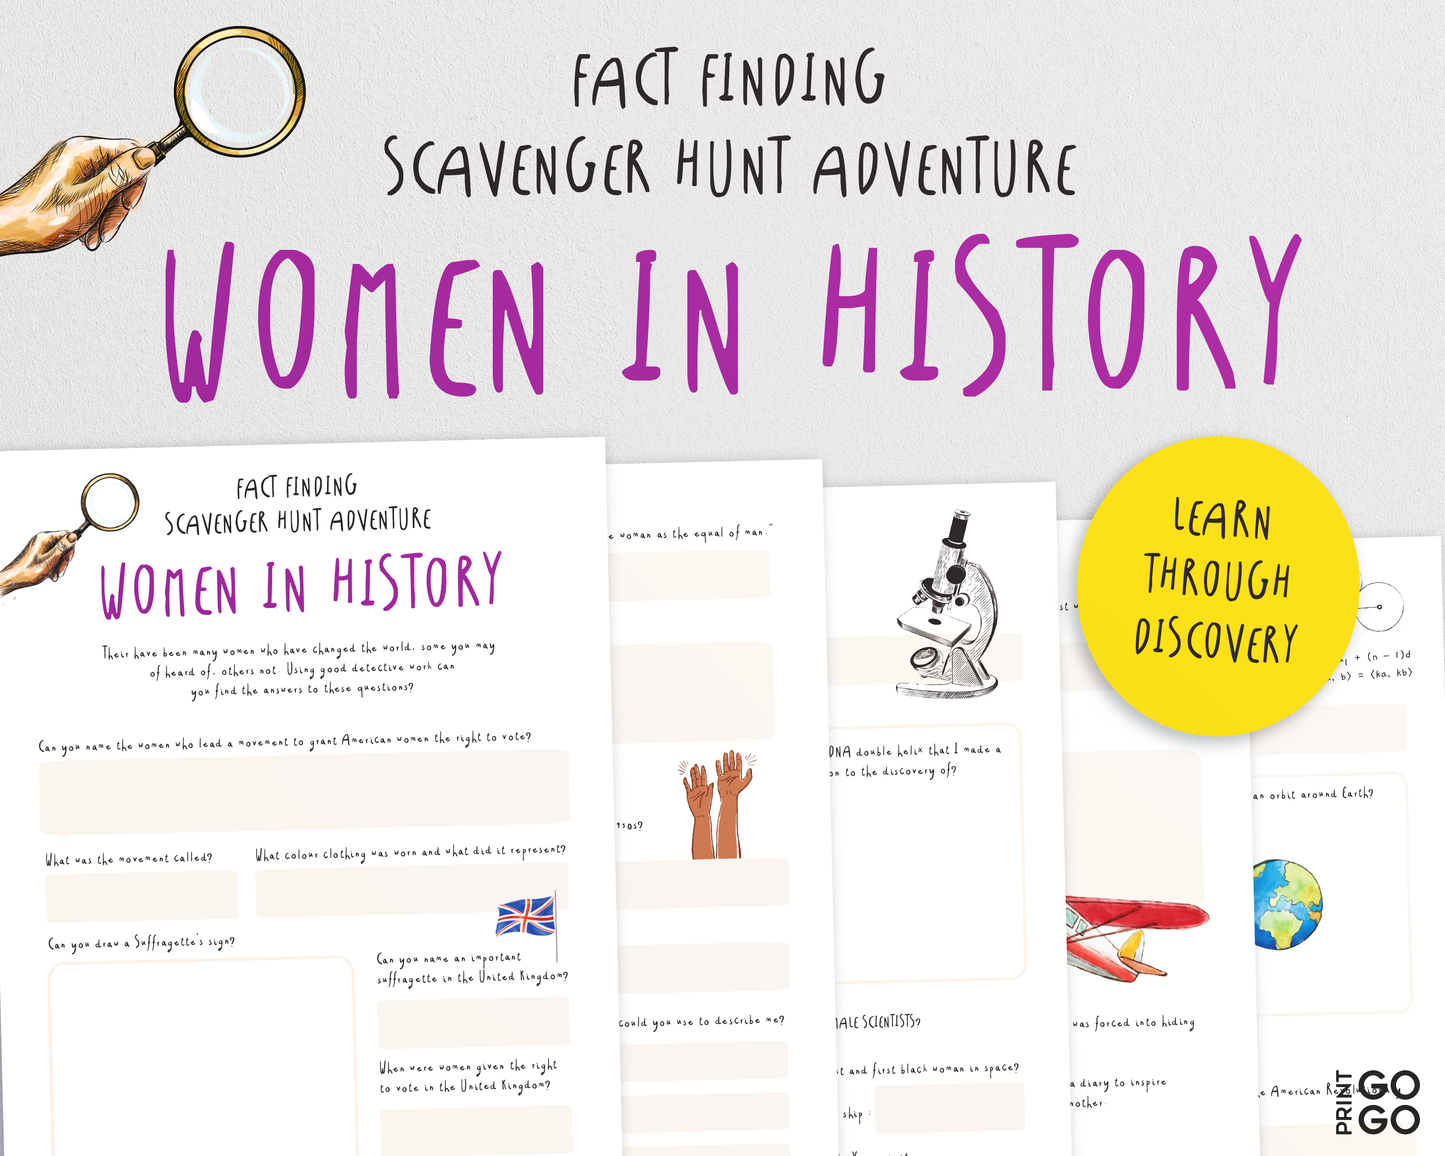 Women In History - A Fact Finding Scavenger Hunt Adventure for Kids